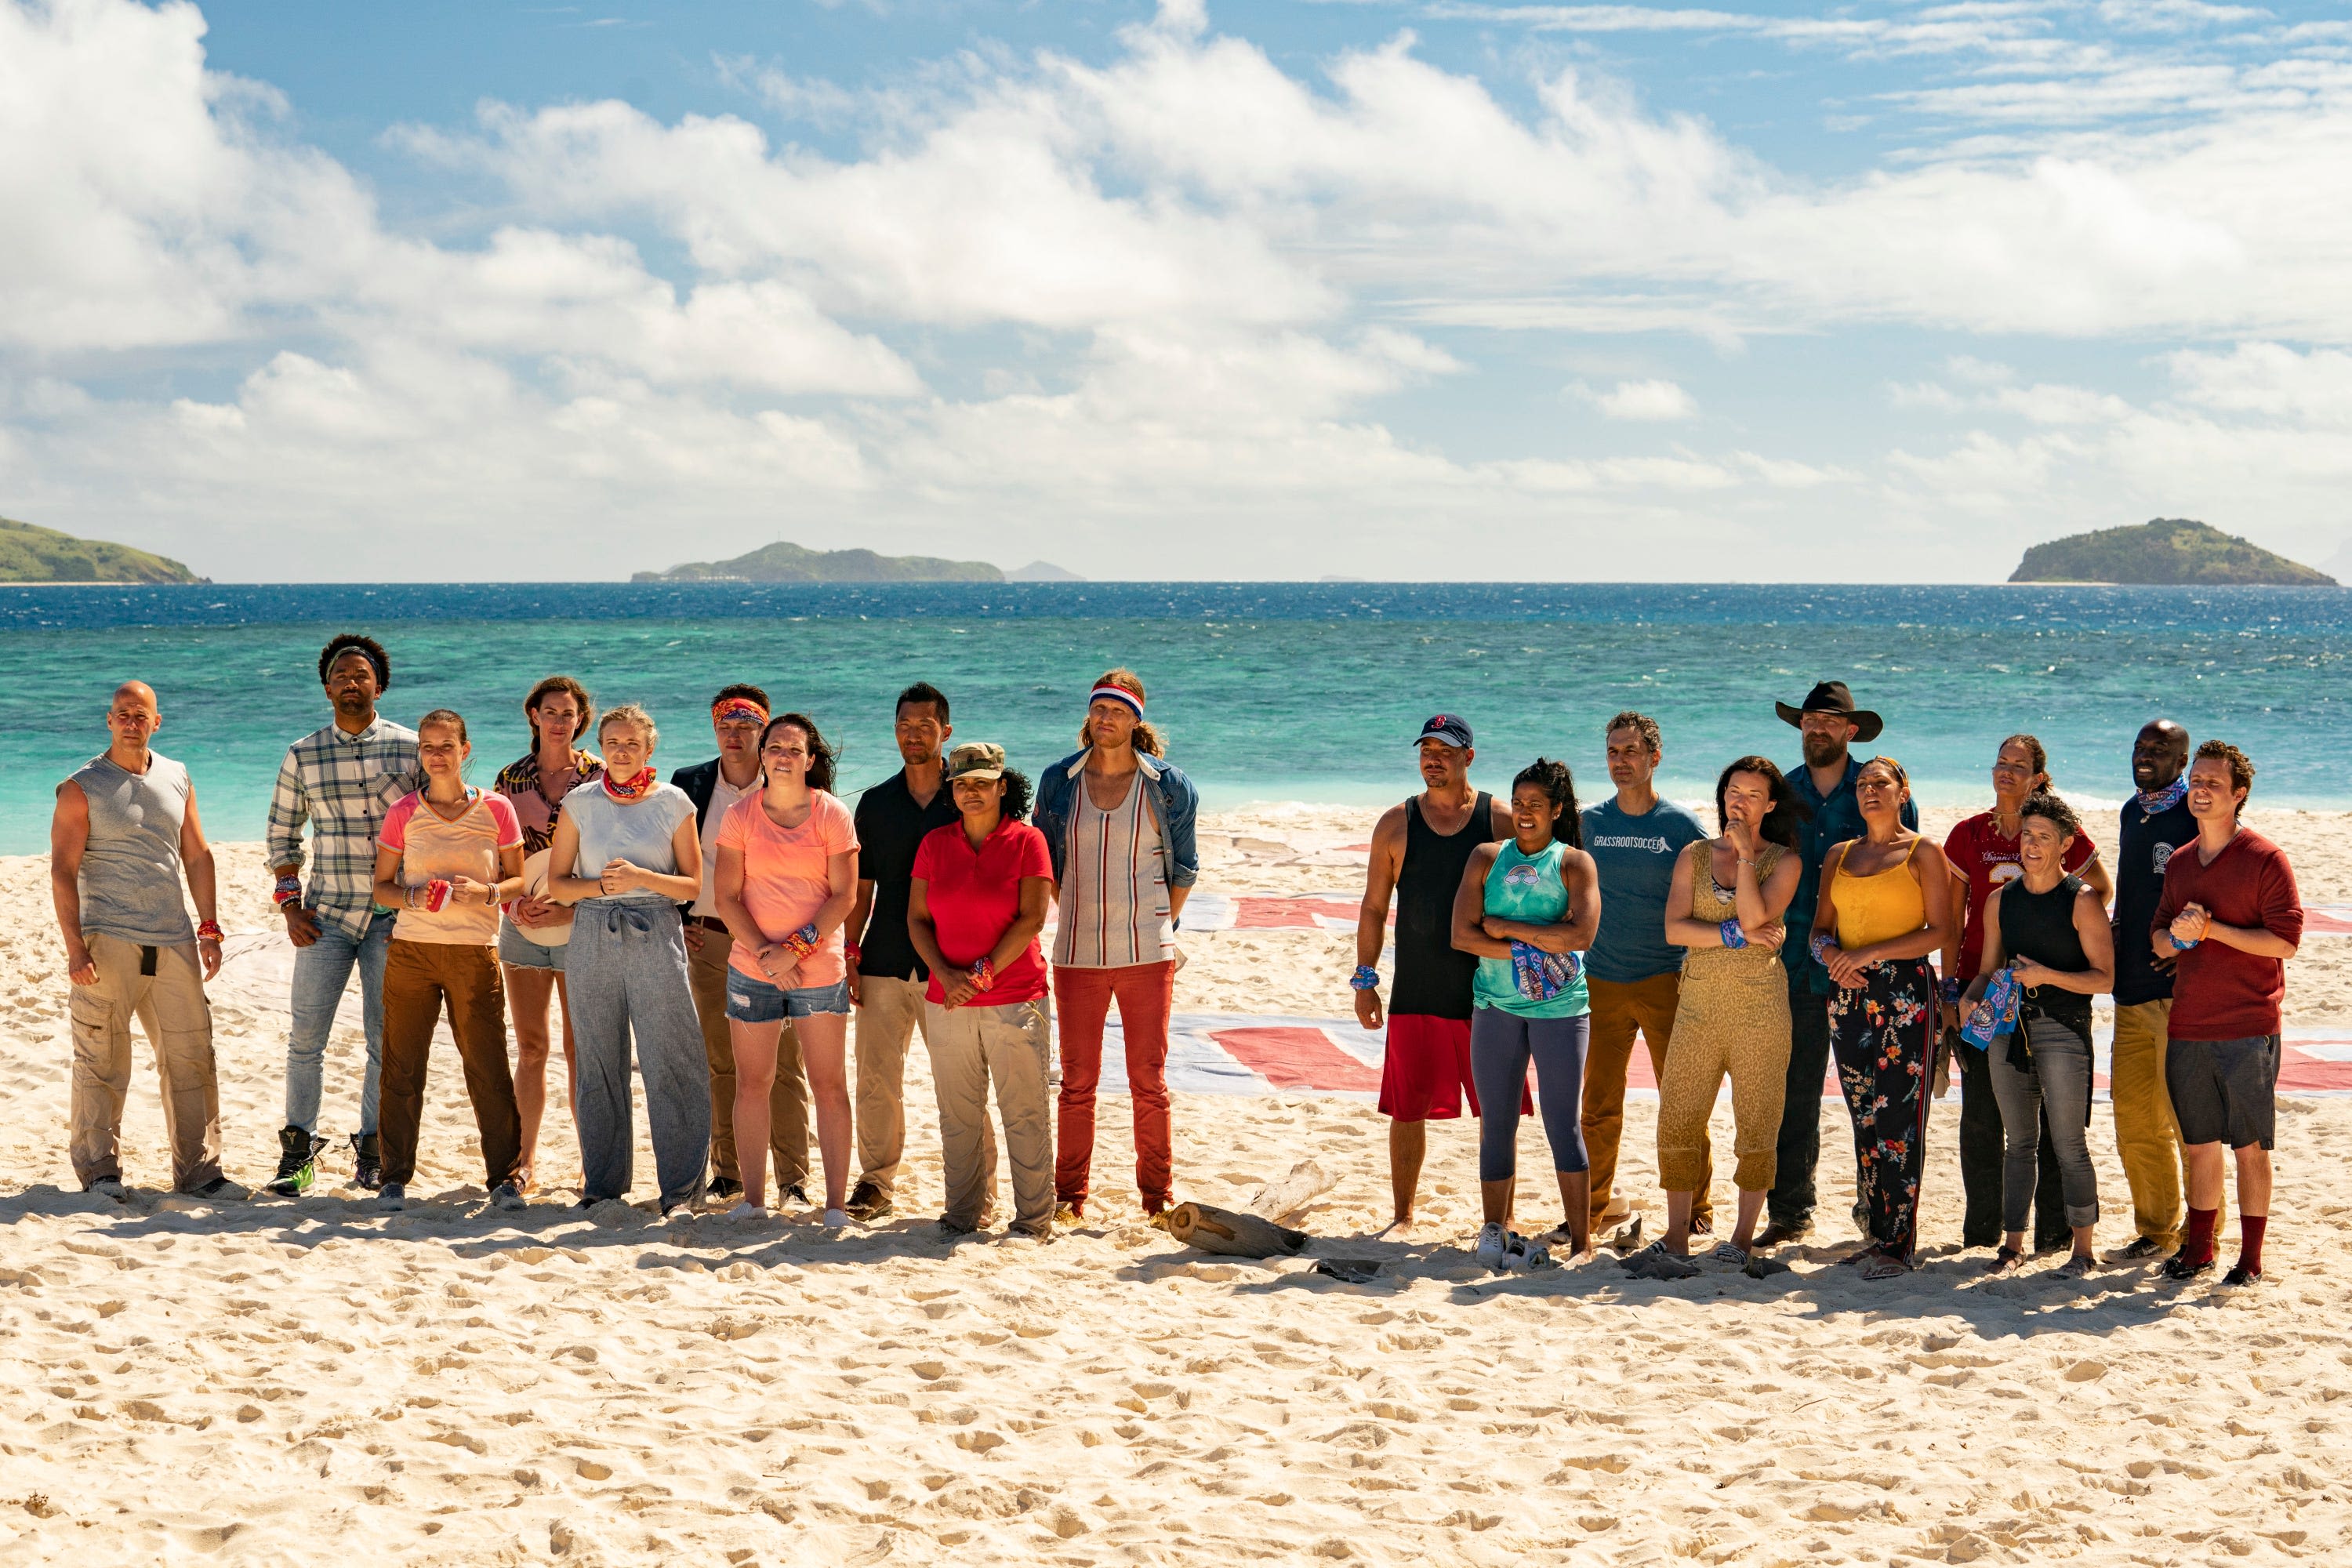 'Survivor' open casting call. Will some from Florida make the cast & win $1 million?